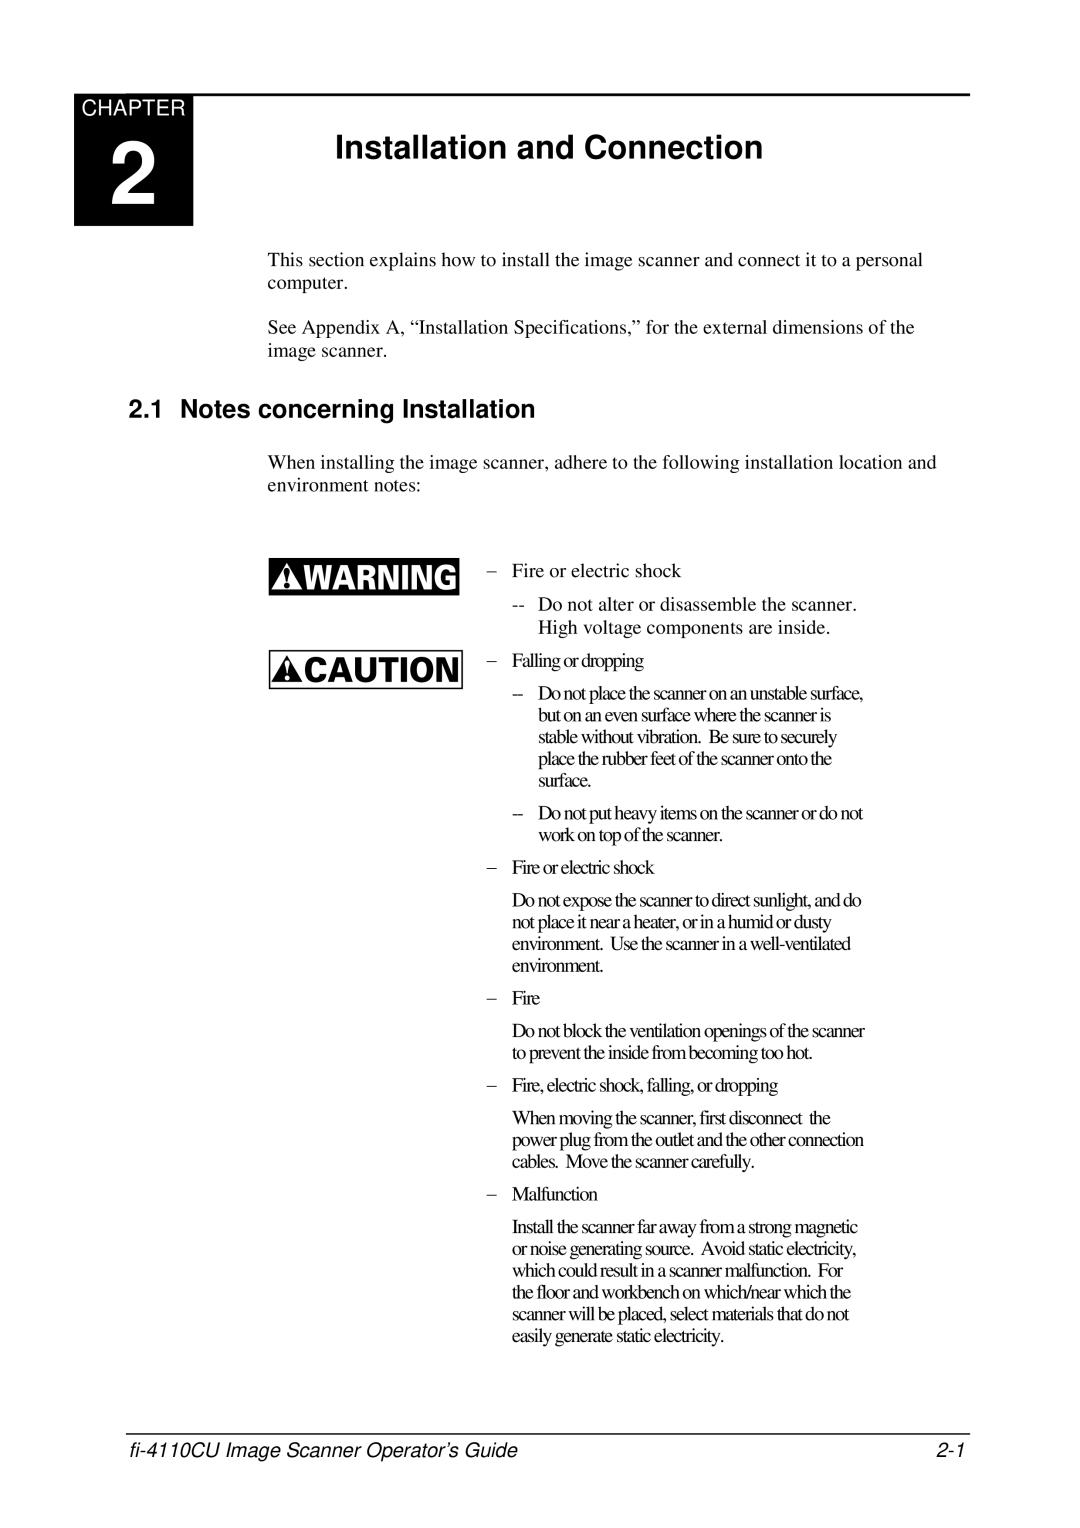 Fujitsu C150-E194-01EN manual Installation and Connection, Notes concerning Installation, Chapter 